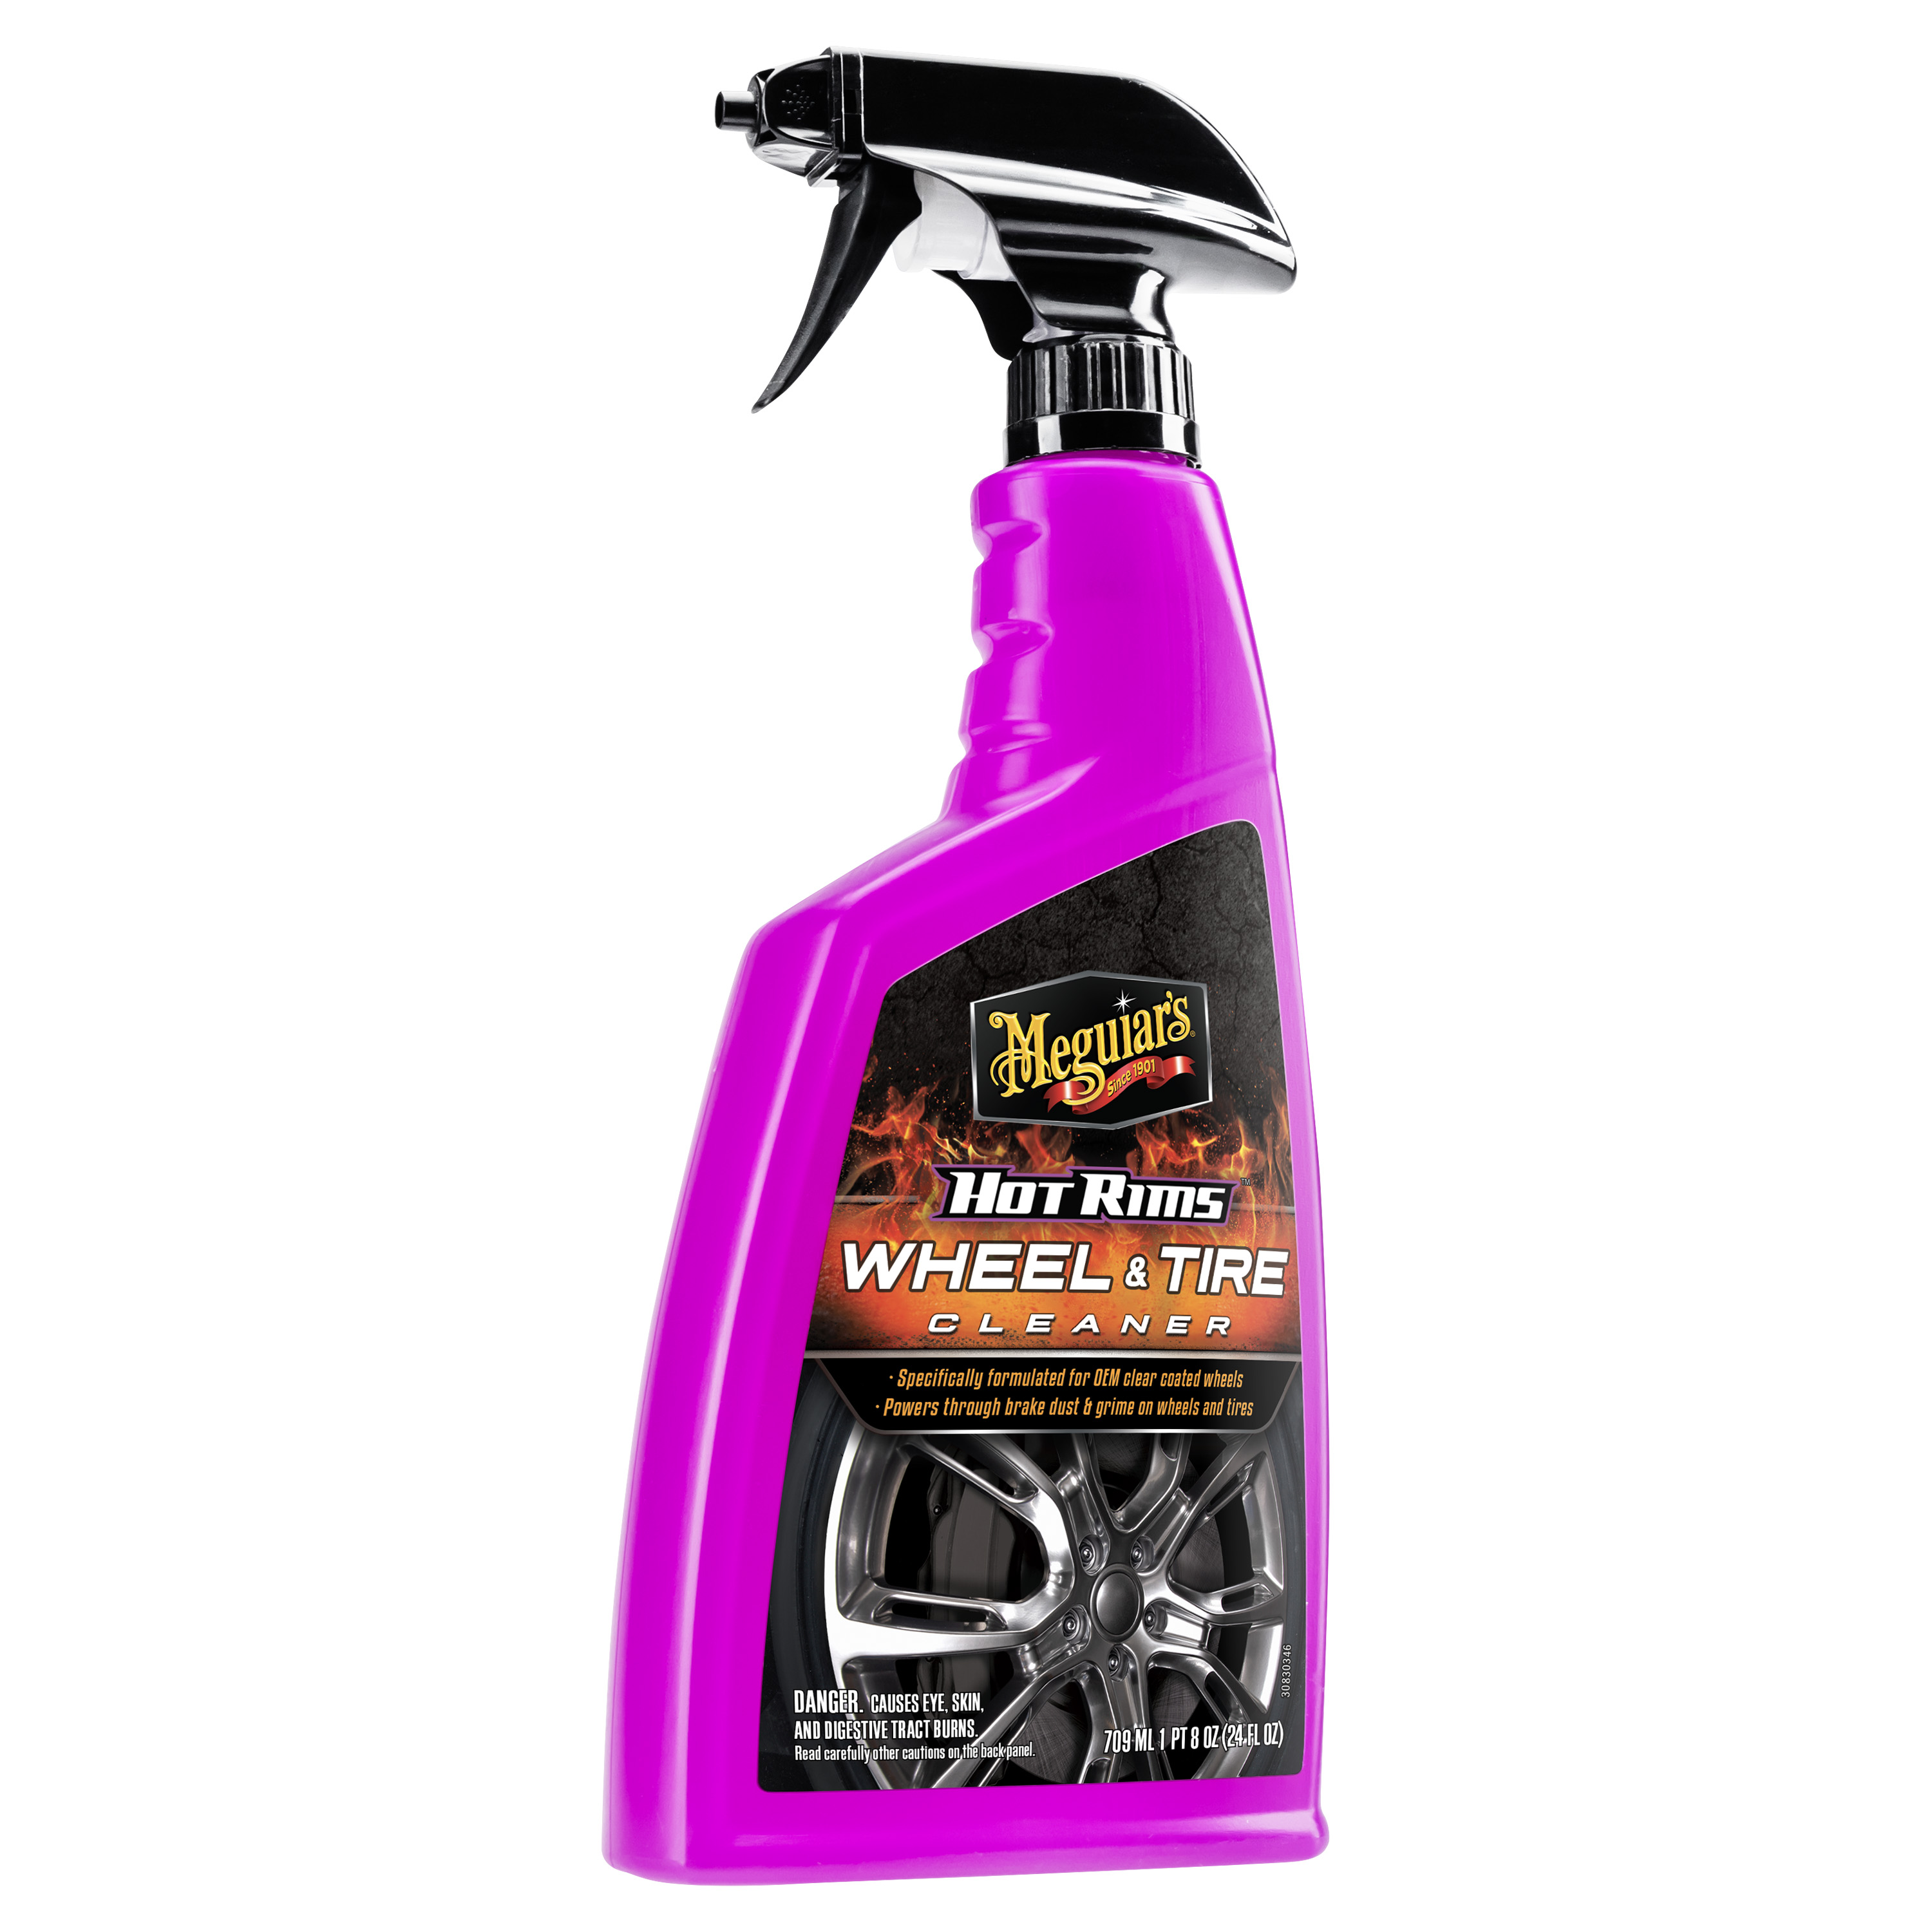 Meguiar's Hot Rims Wheel and Tire Cleaner, G9524, 24 oz, Spray - image 1 of 10